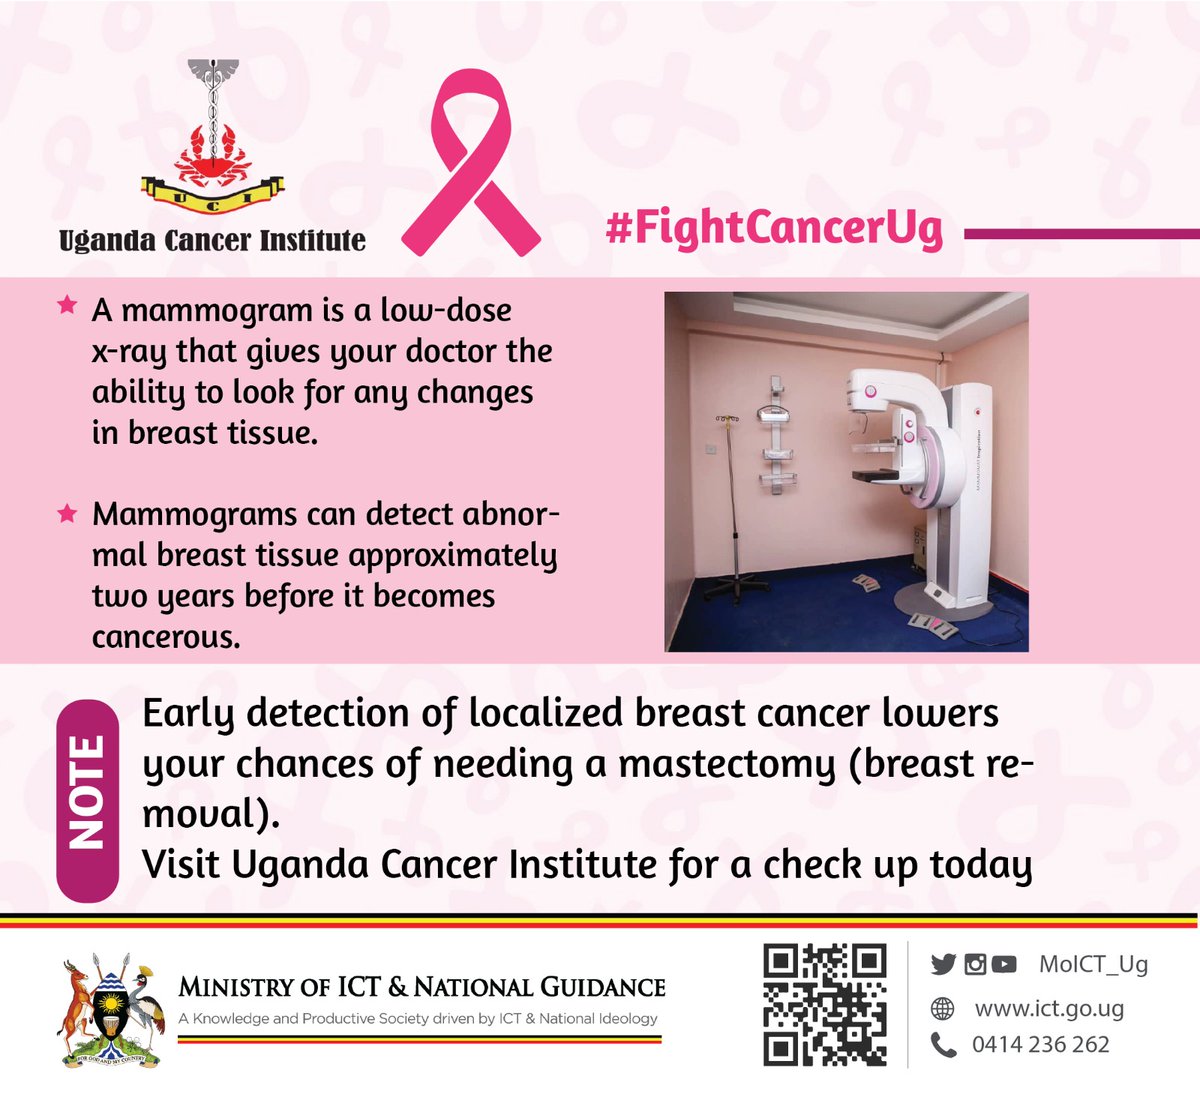 Cancer causes cells to divide uncontrollably. This can result in tumors, damage to the immune system, and other impairment that can be fatal. 
#FightCancerUg
@DMU_Uganda  @UgandaCancerIns   @MoICT_Ug @GovUganda